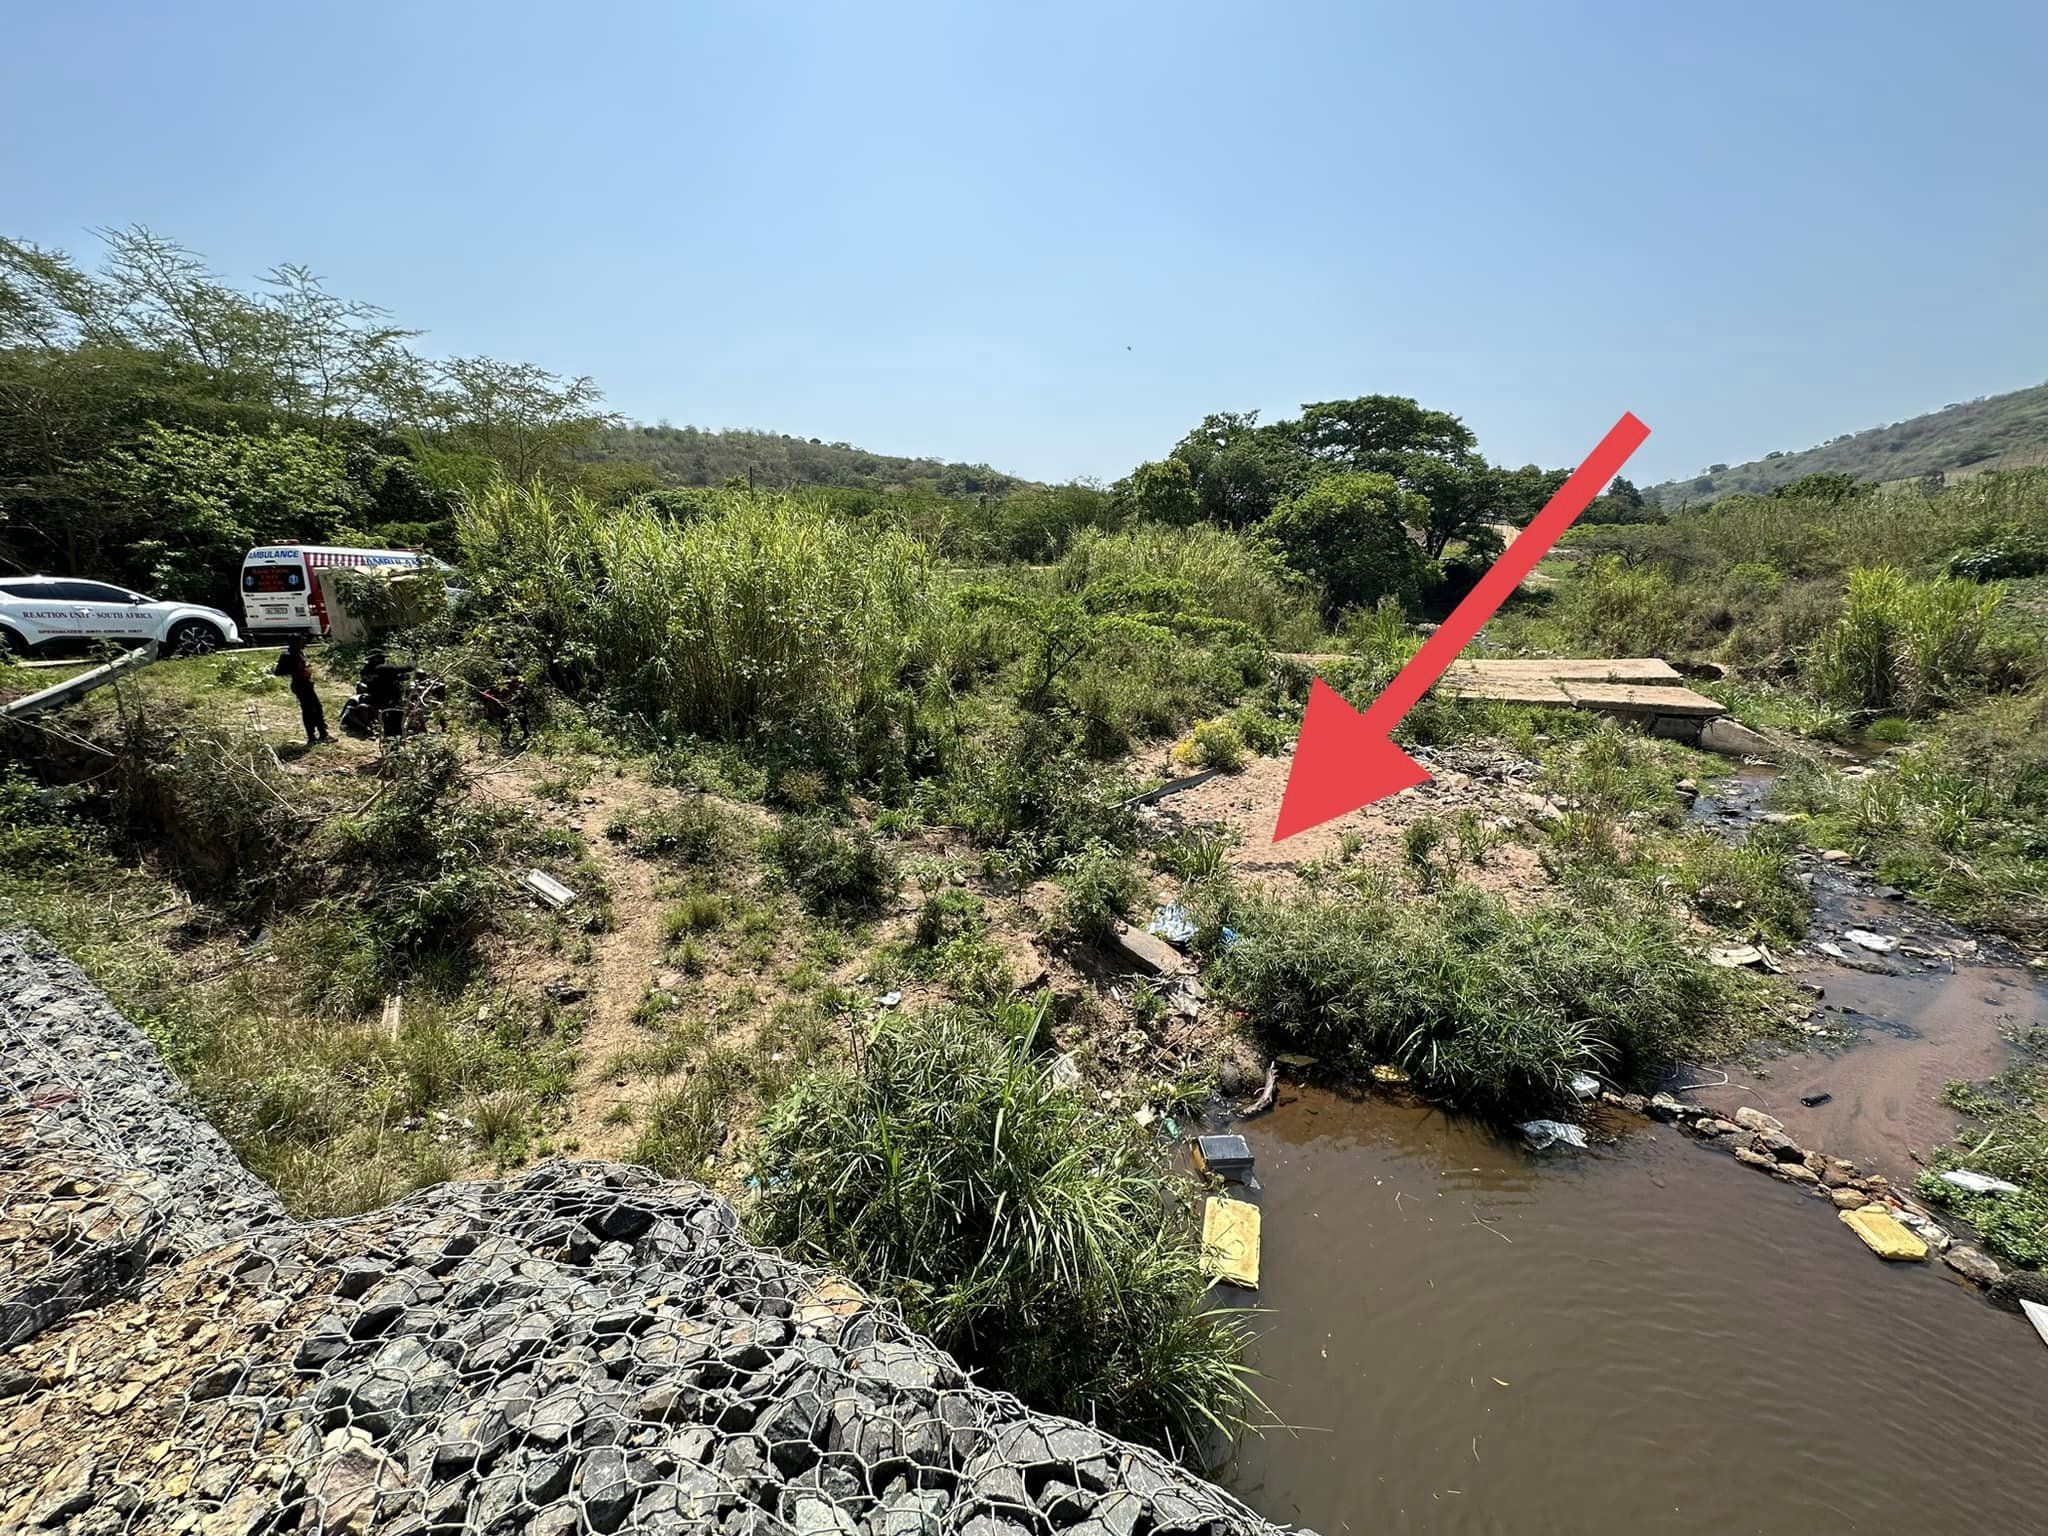 Children discover the body of a man next to a river in Buffelsdraai